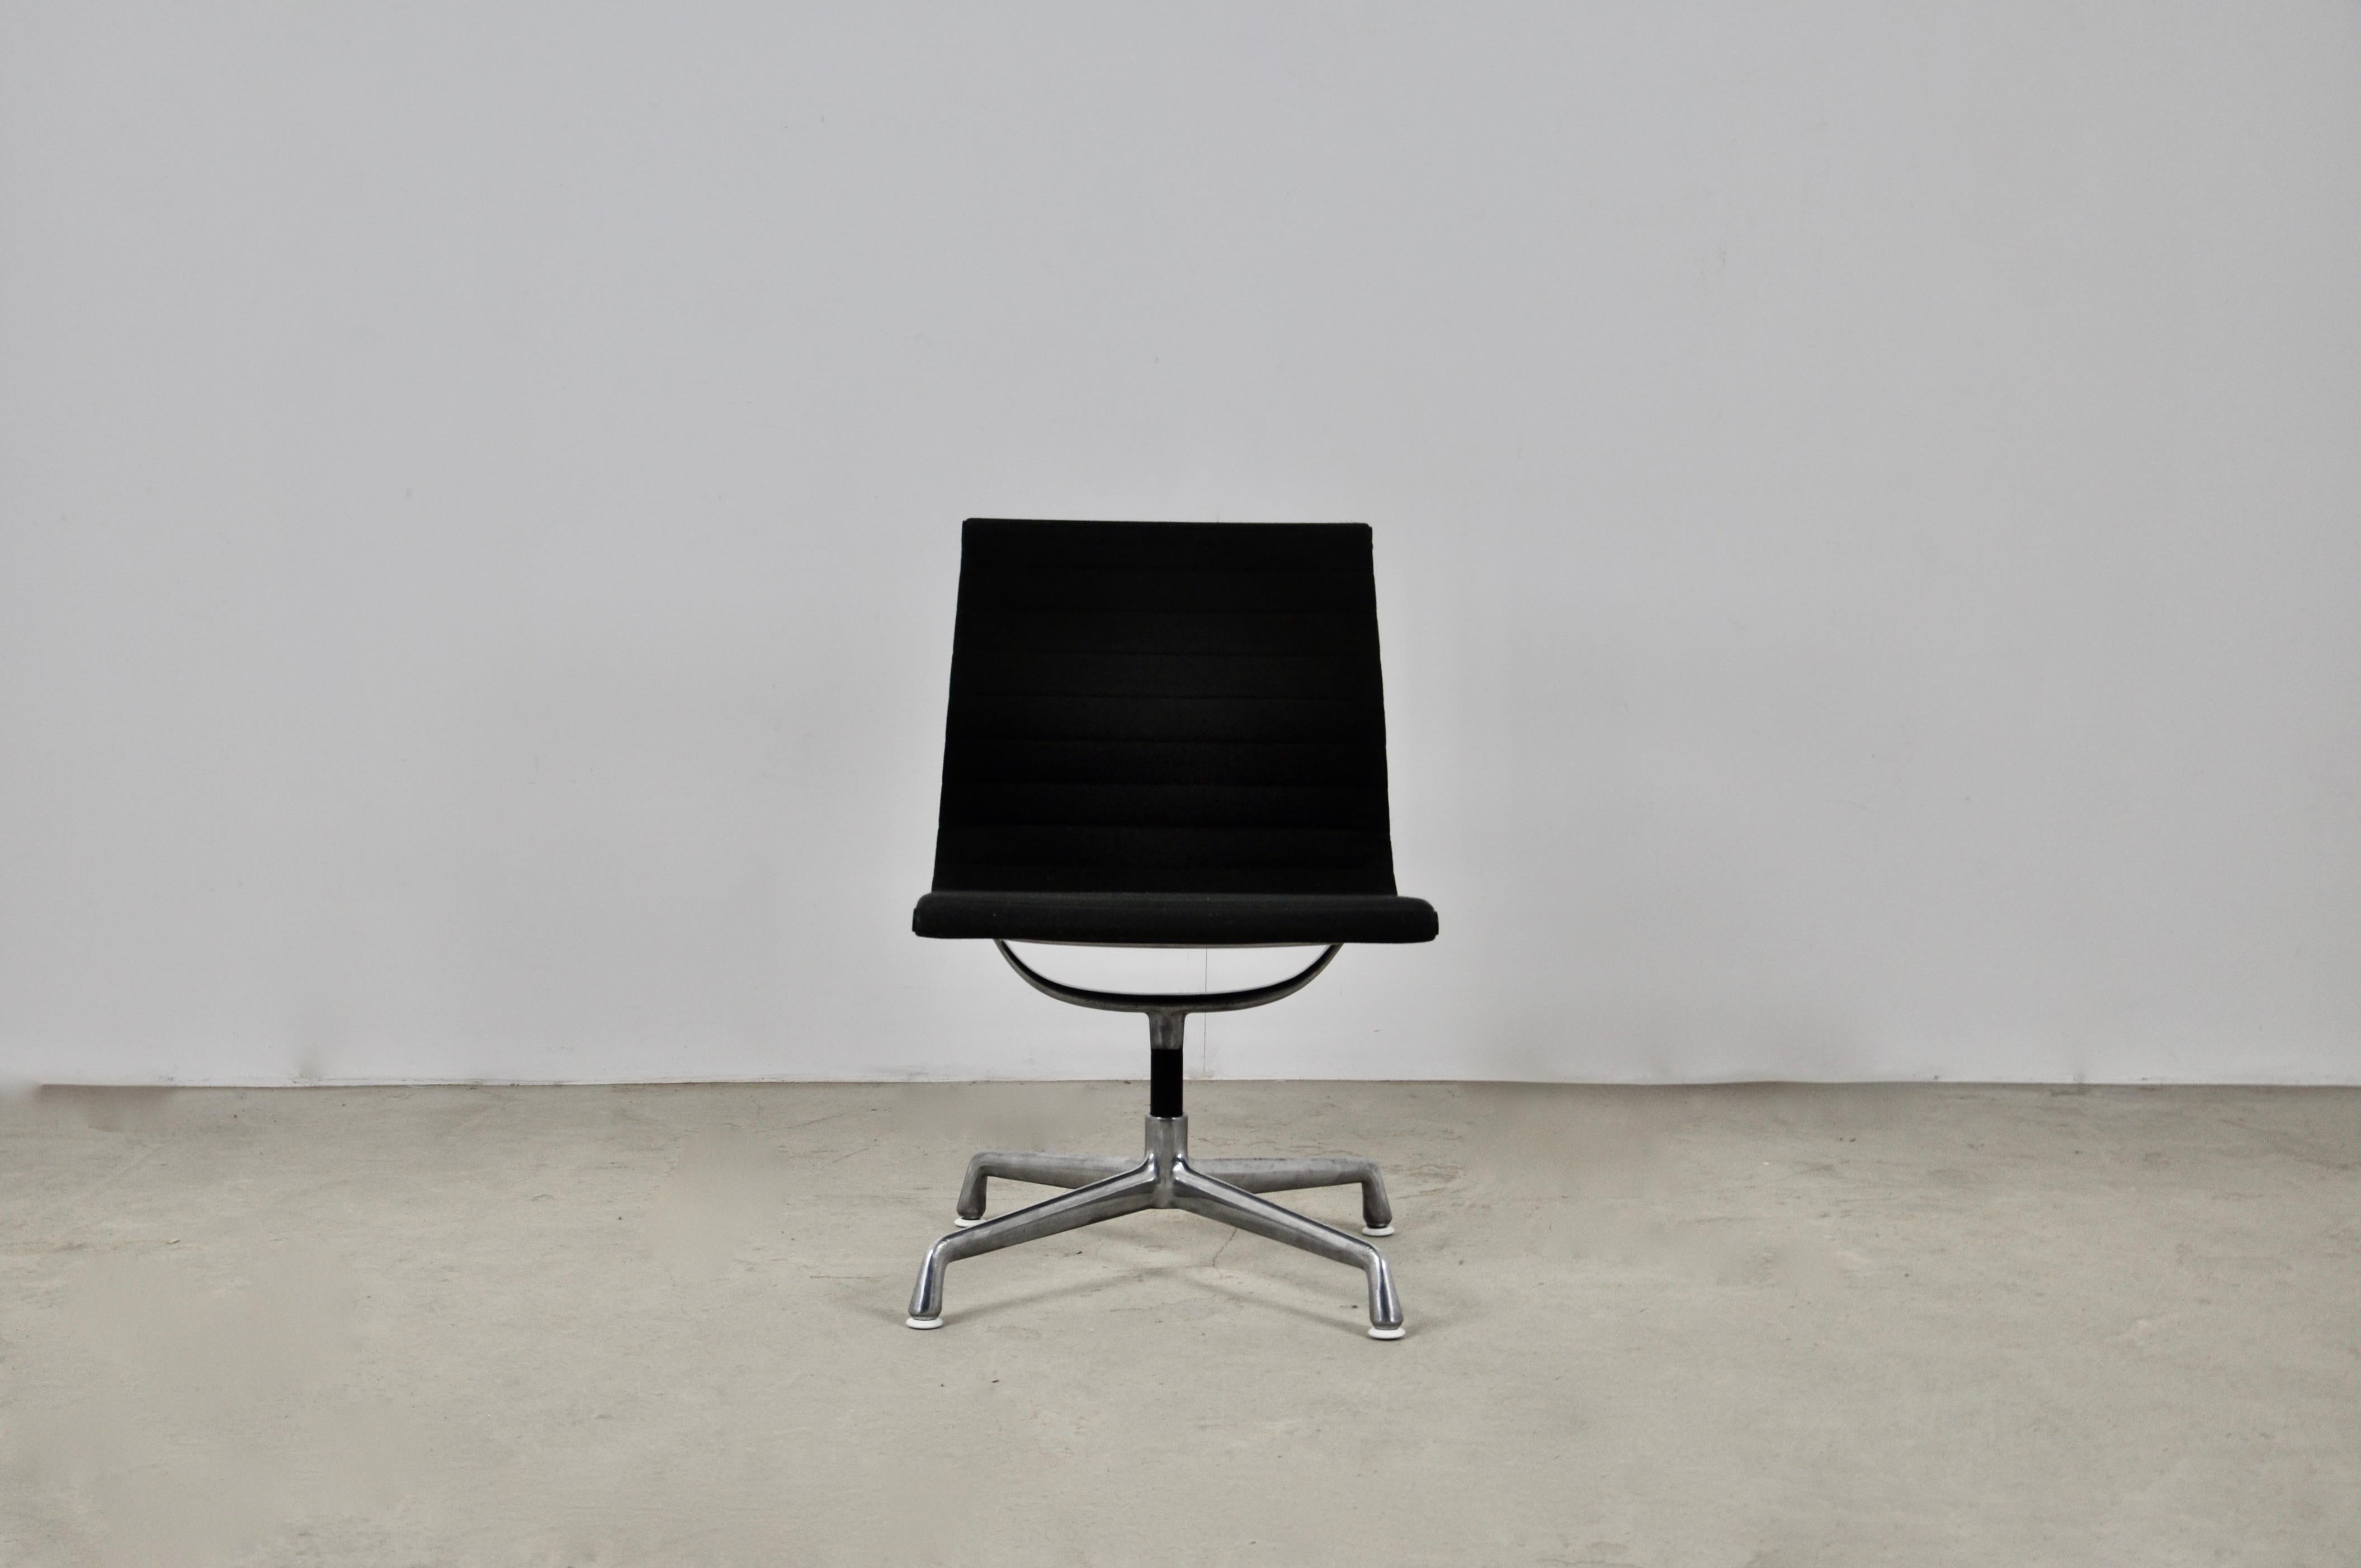 Mid-Century Modern Black Office chair by Charles &Ray Eames for Herman Miller, 1960s For Sale